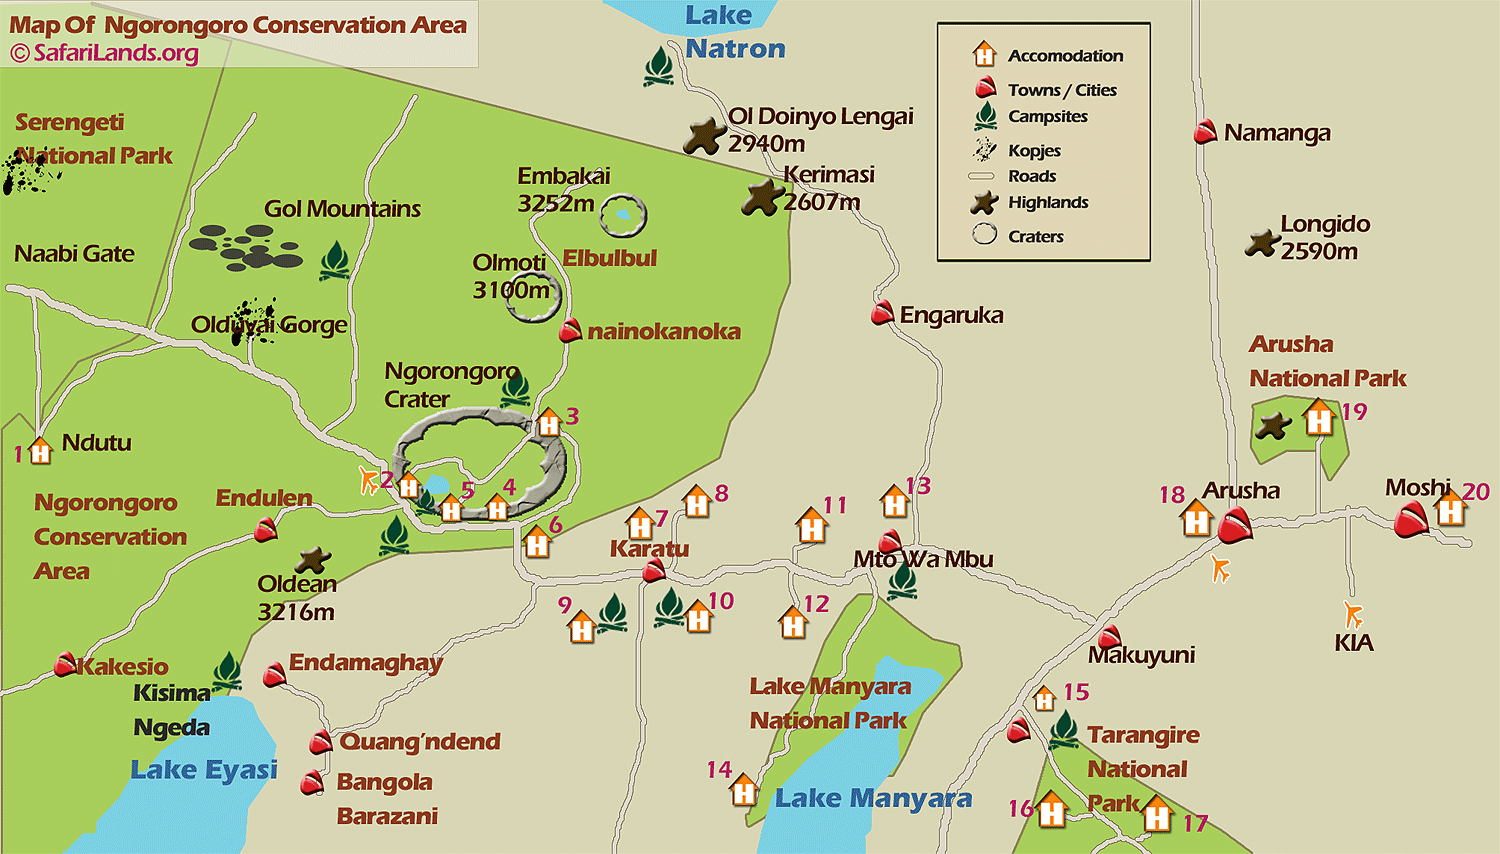 Map of the Ngorongoro Conservation Area (Crater) and its sorrounding Areas